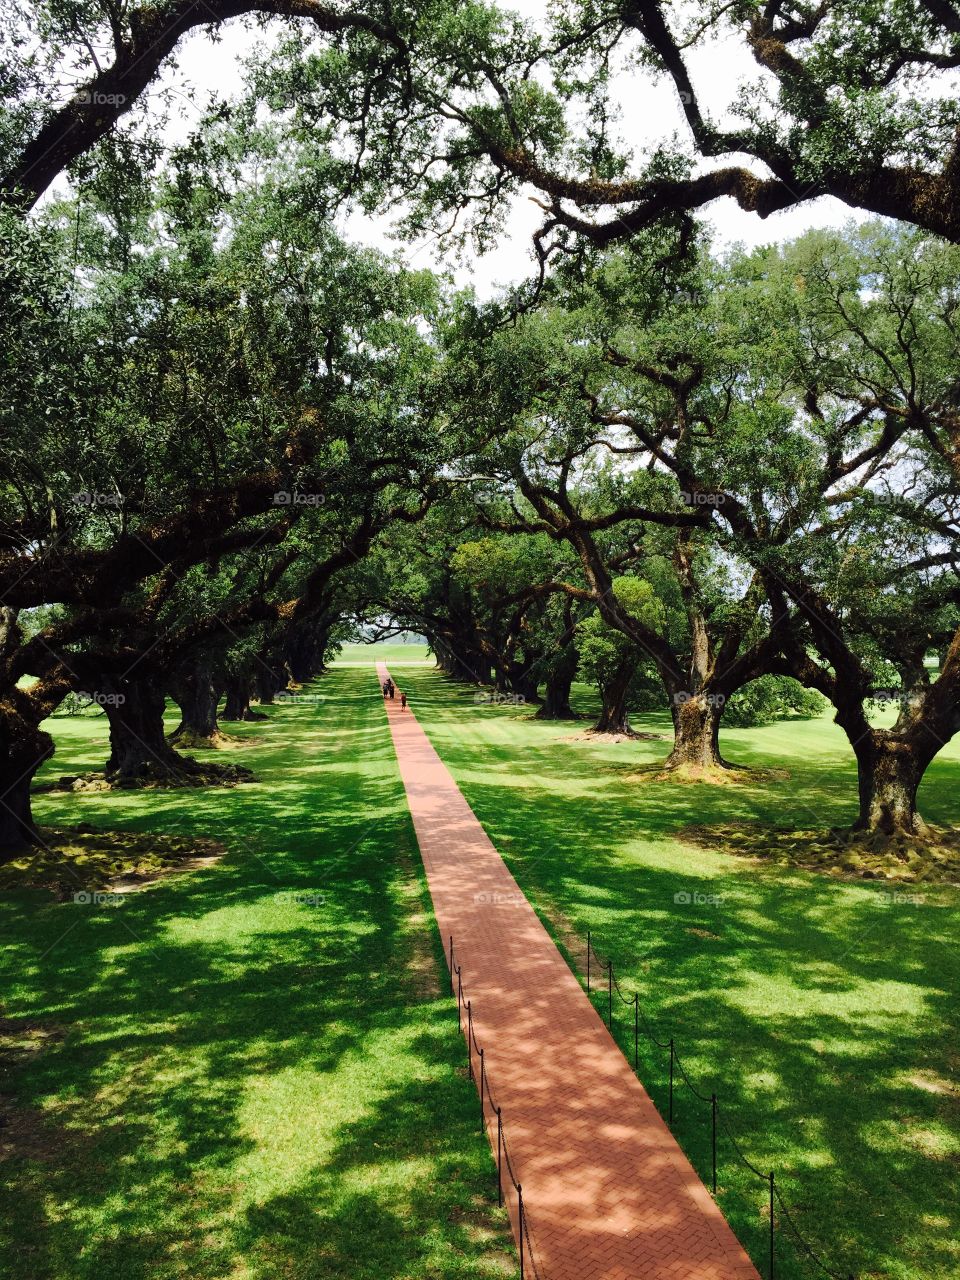 Oak Alley Plantation. Oak Alley Plantation, Louisiana... The most beautiful place I've ever seen!! 